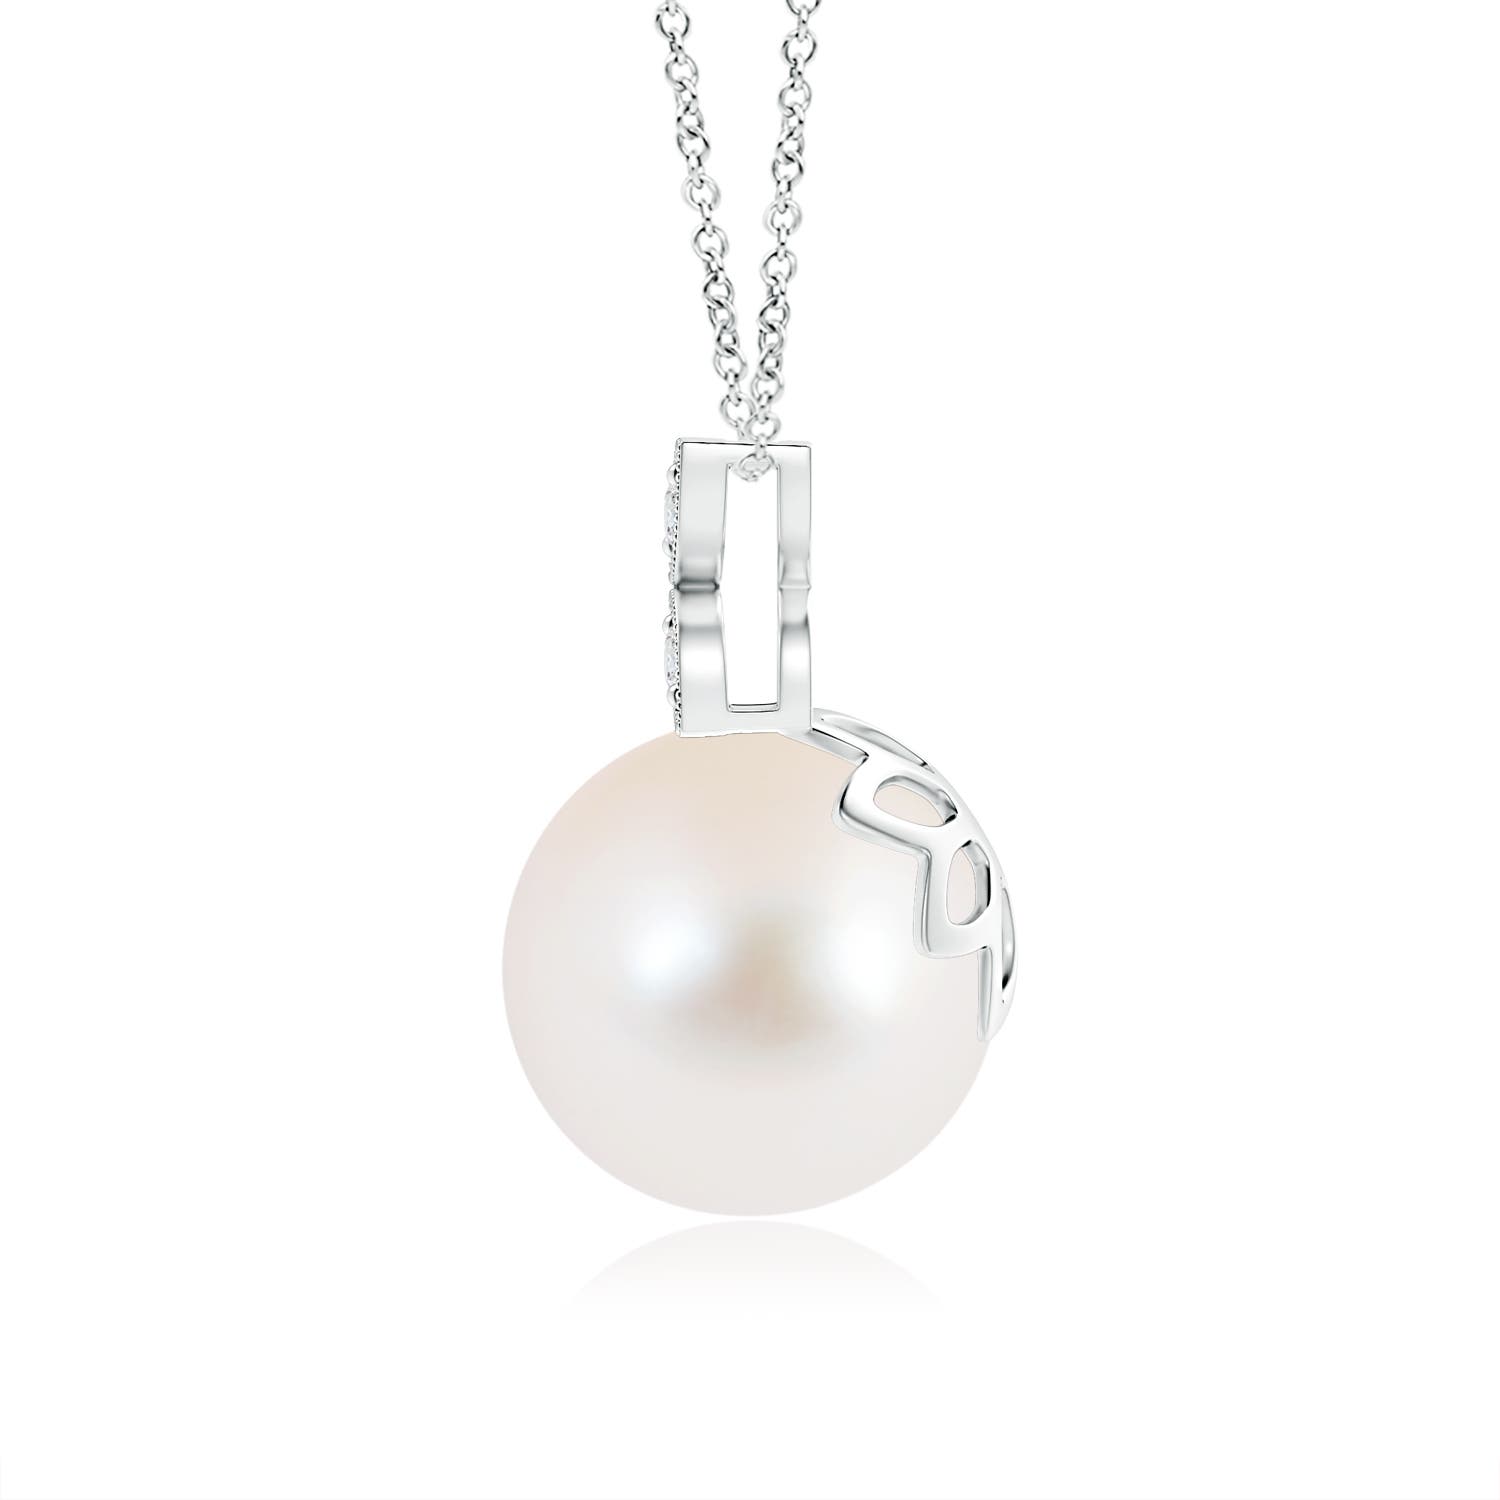 AAA - Freshwater Cultured Pearl / 5.32 CT / 14 KT White Gold